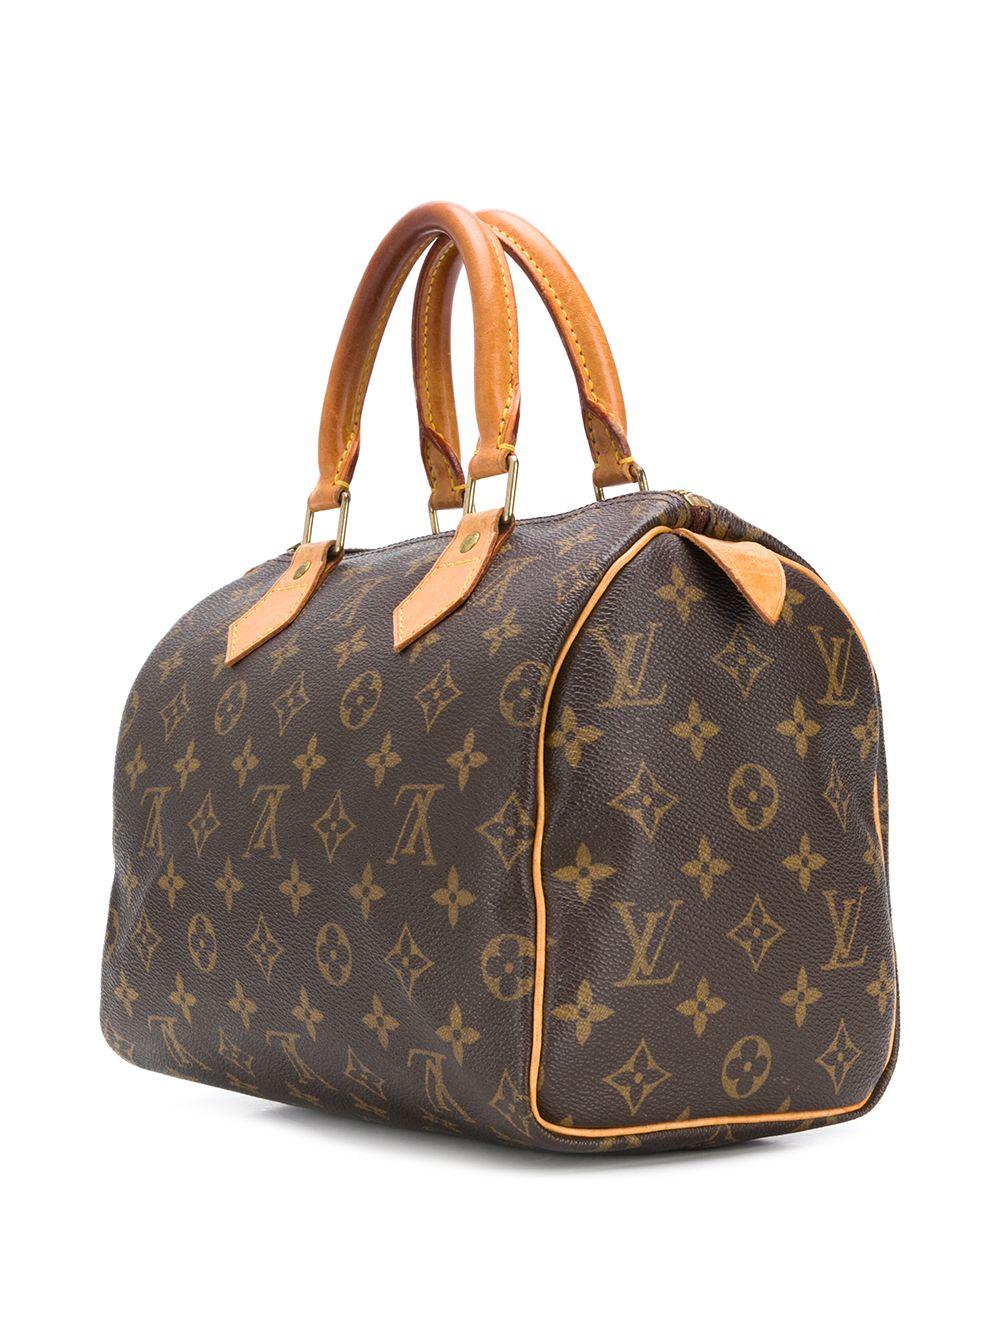 This meticulously hand-painted Louis Vuitton 'New Balenciaga' Speedy bag from Rewind's Emotional Baggage collection, where iconic handbags are specially customized with hand-painted illustrations, is perfect for that weekend getaway. Expertly